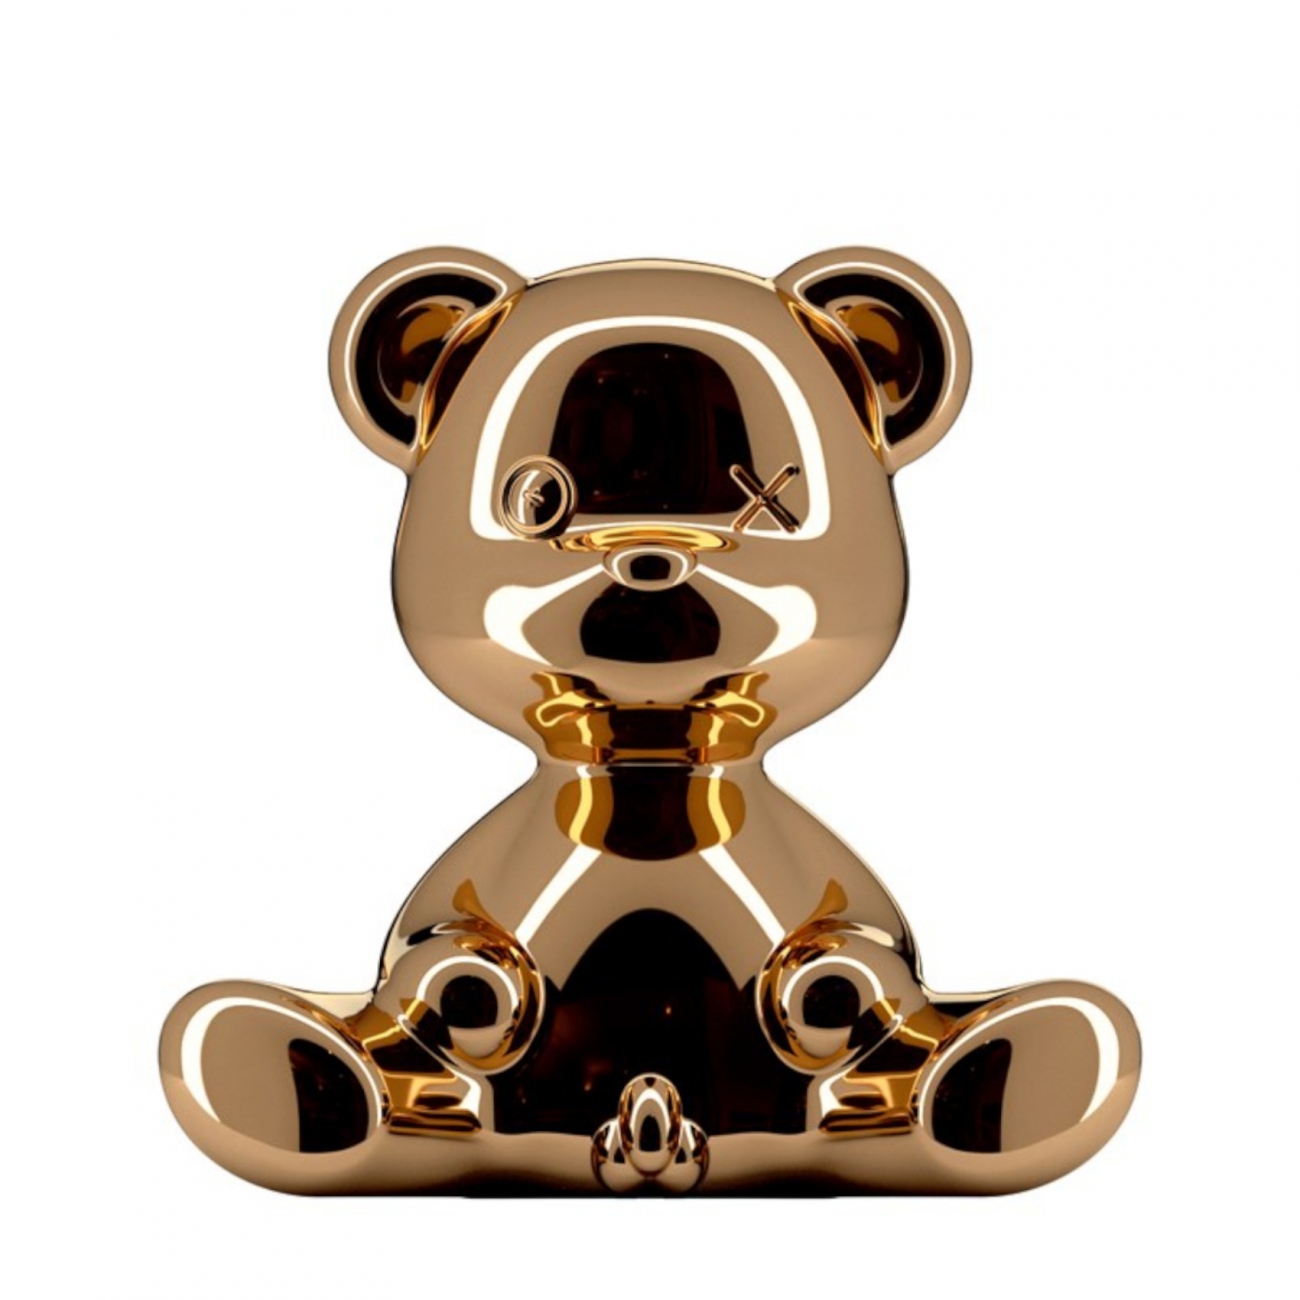 QEEBOO TEDDY BOY METAL LAMP WITH CABLE